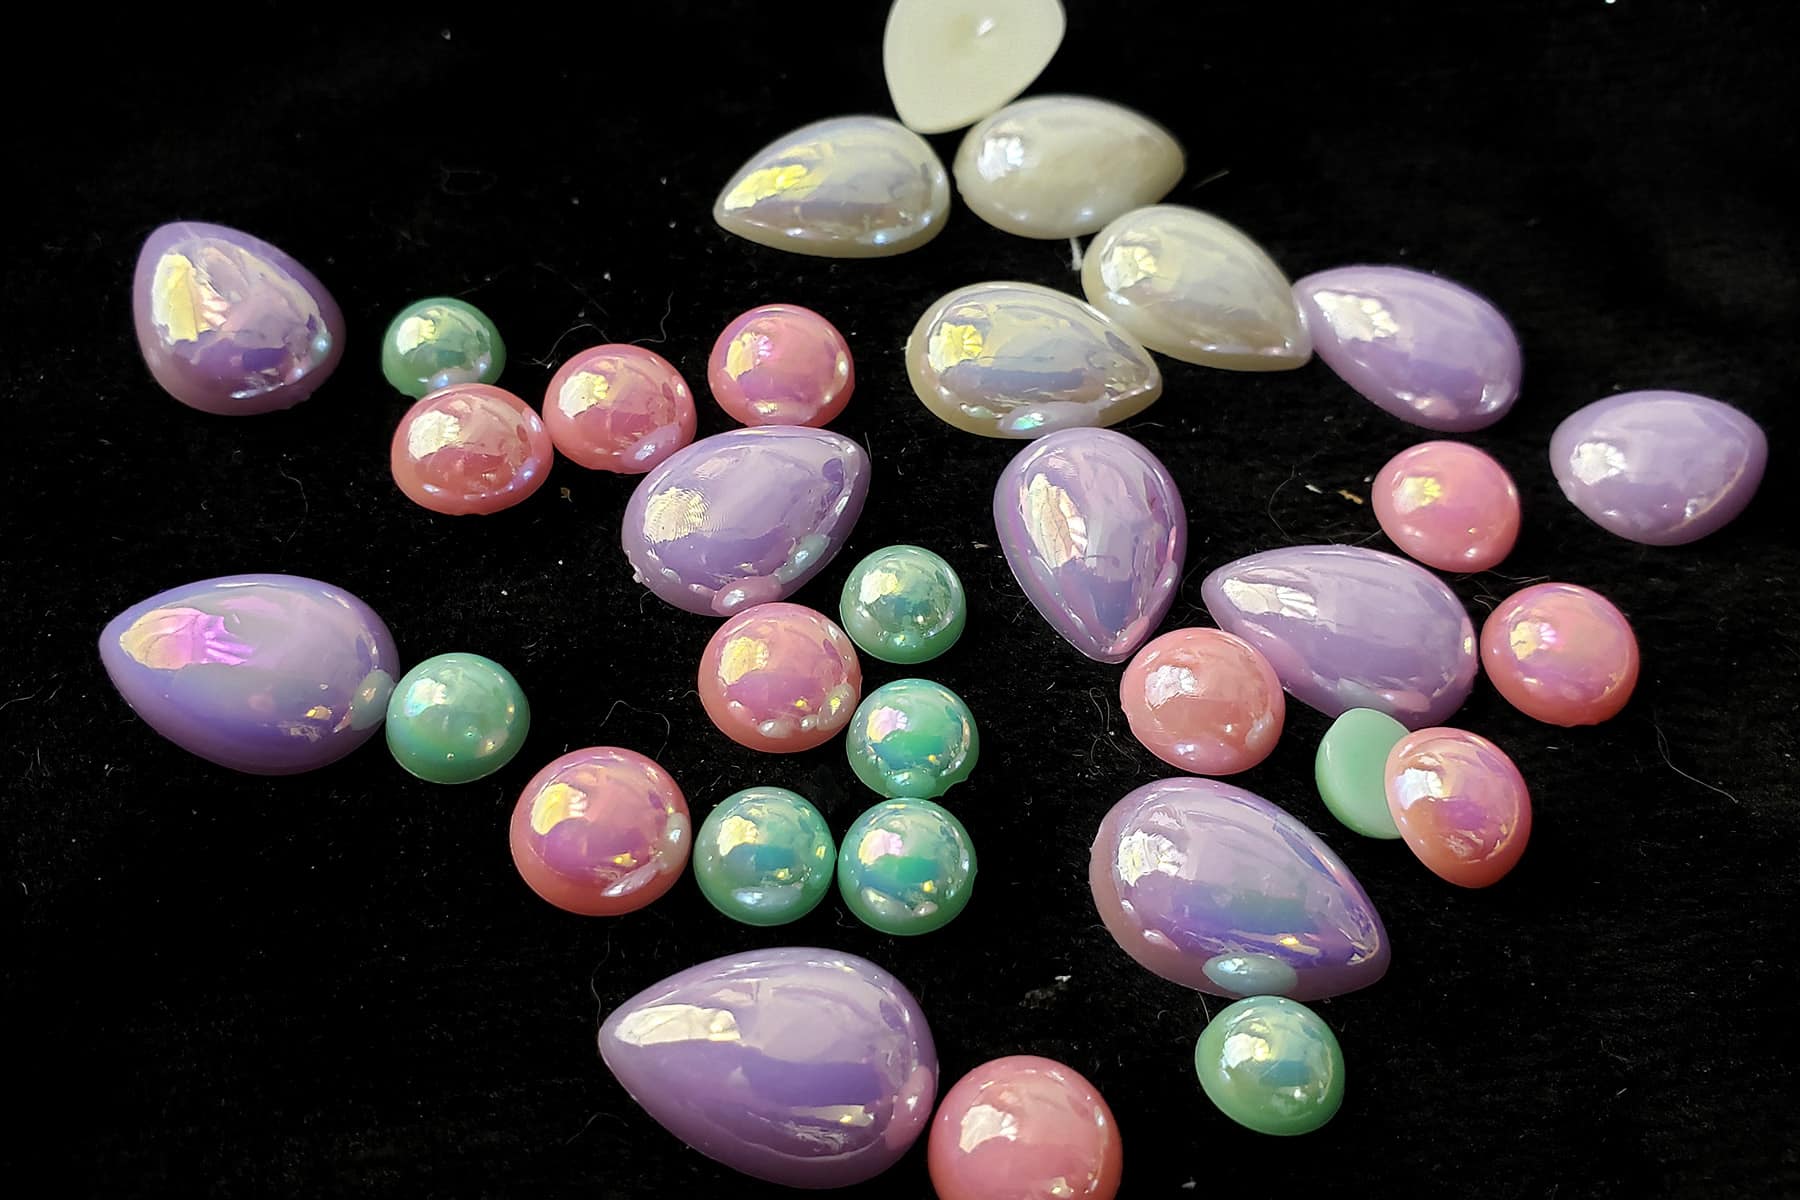 A handful of small, pearl-finished pastel stones in white, pink, mint green, and lavender.